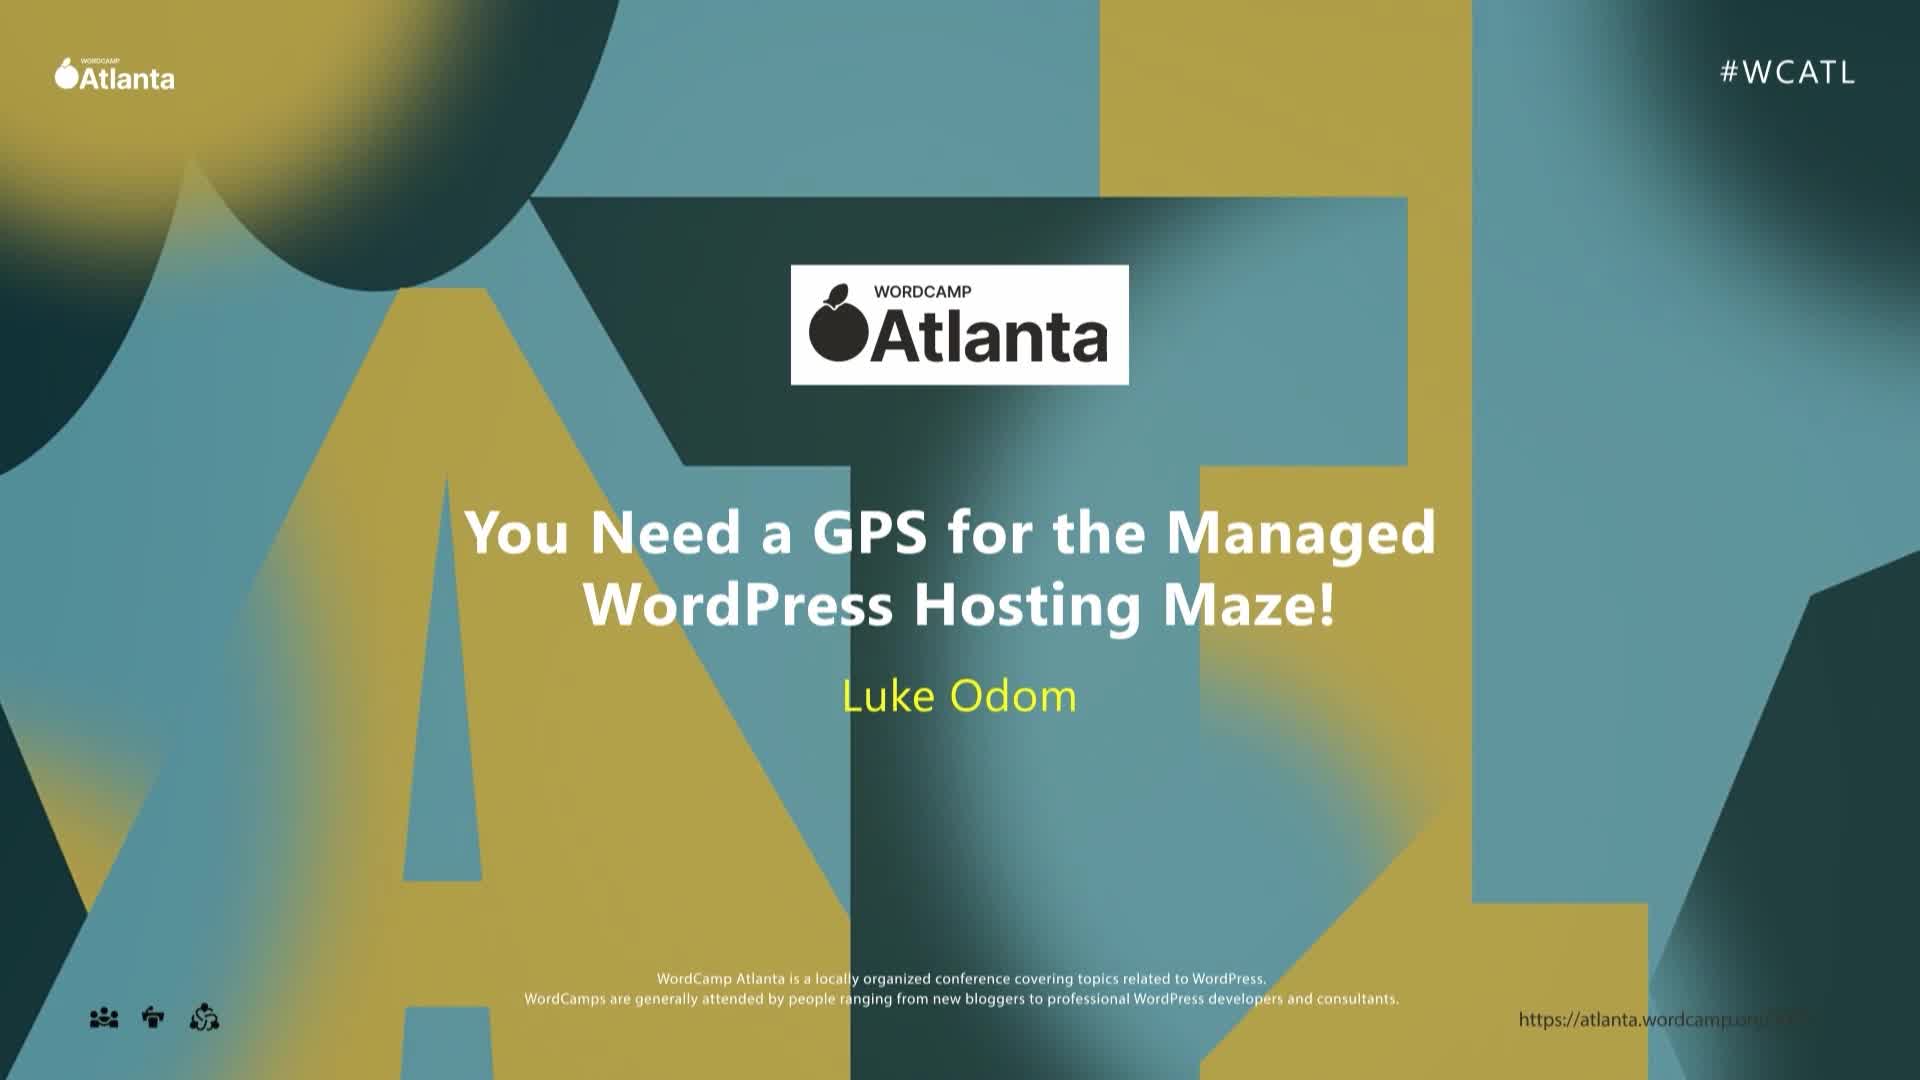 You Need a GPS for the Managed WordPress Hosting Maze!